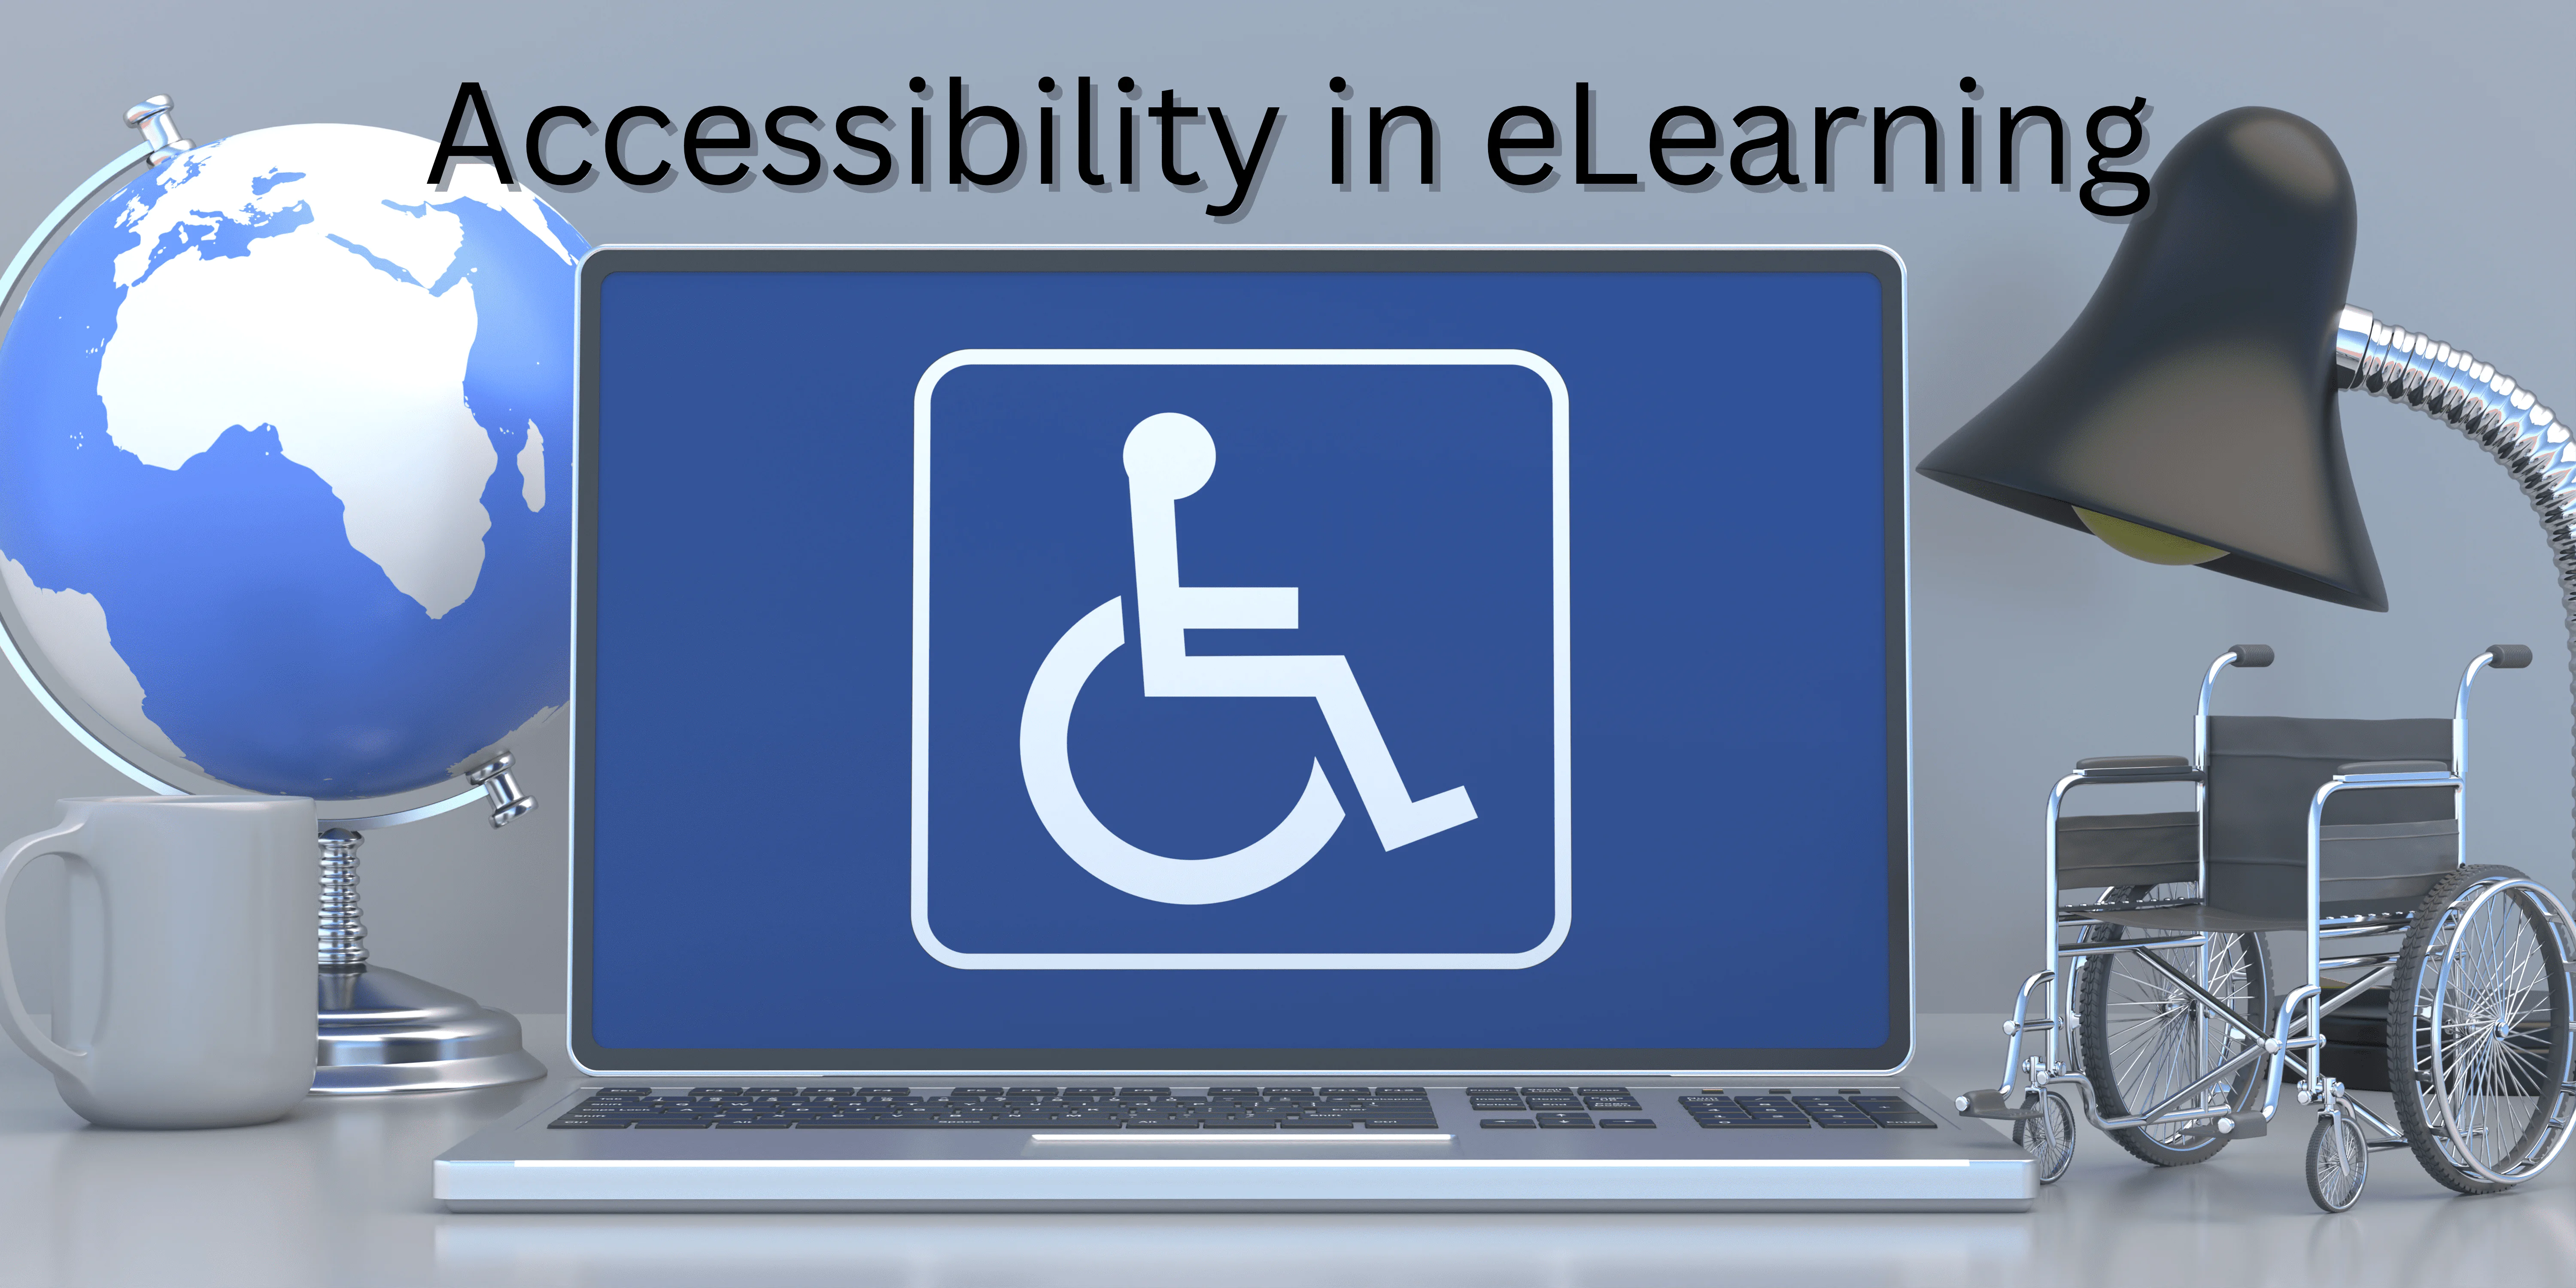 Accessible eLearning Using Inclusive Design – A Case Study